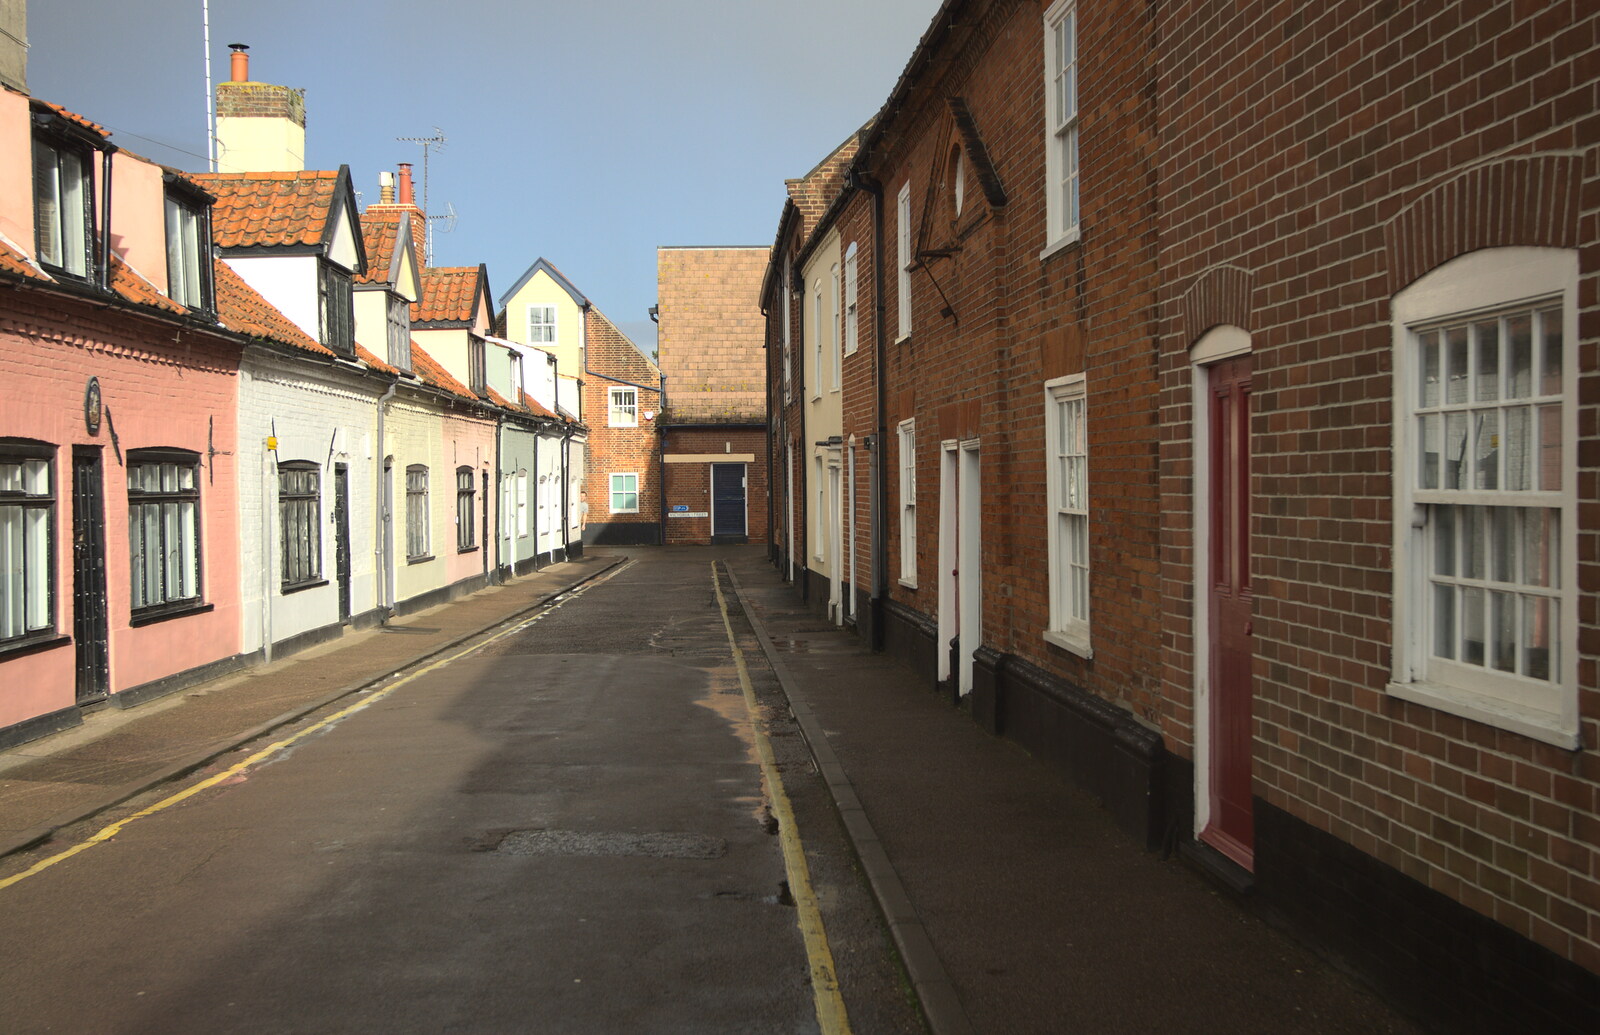 Church Street, with Adnams' fake houses from Apple's Adnams Brewery Birthday Tour, Southwold, Suffolk - 29th November 2012